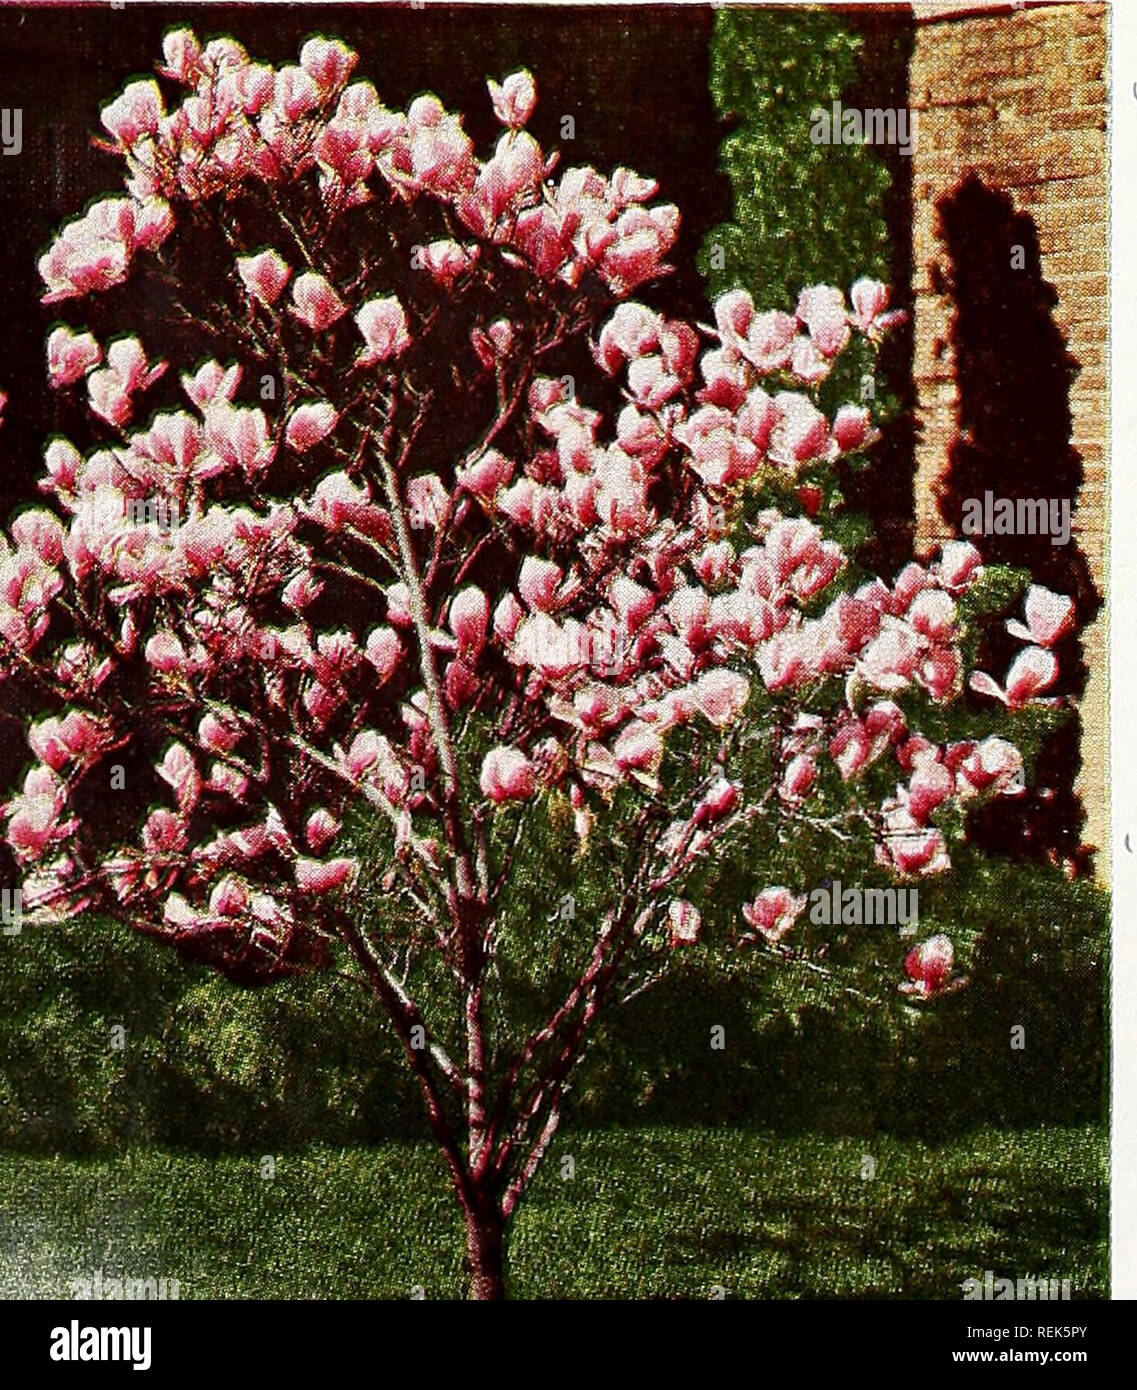 . C. M. Hobbs &amp; Sons. Nurseries Horticulture Catalogs; Evergreens Catalogs; Fruit trees Catalogs; Climbing plants Catalogs; Shrubs Catalogs; Vegetables Catalogs. MIMOSA - Silk Tree A rather small ornamental tree that grows rapidly under a variety of soil conditions. Graceful fern-like leaves and pink flowers in clusters at the end of the branches in May and June. OAK - Que re us PIN OAK (Q. palustris). One of the finest and most graceful as well as beautiful of all the shade trees. Very symmetrical, the branches grow horizontally from a central trunk and the lower branches bend down touchi Stock Photo